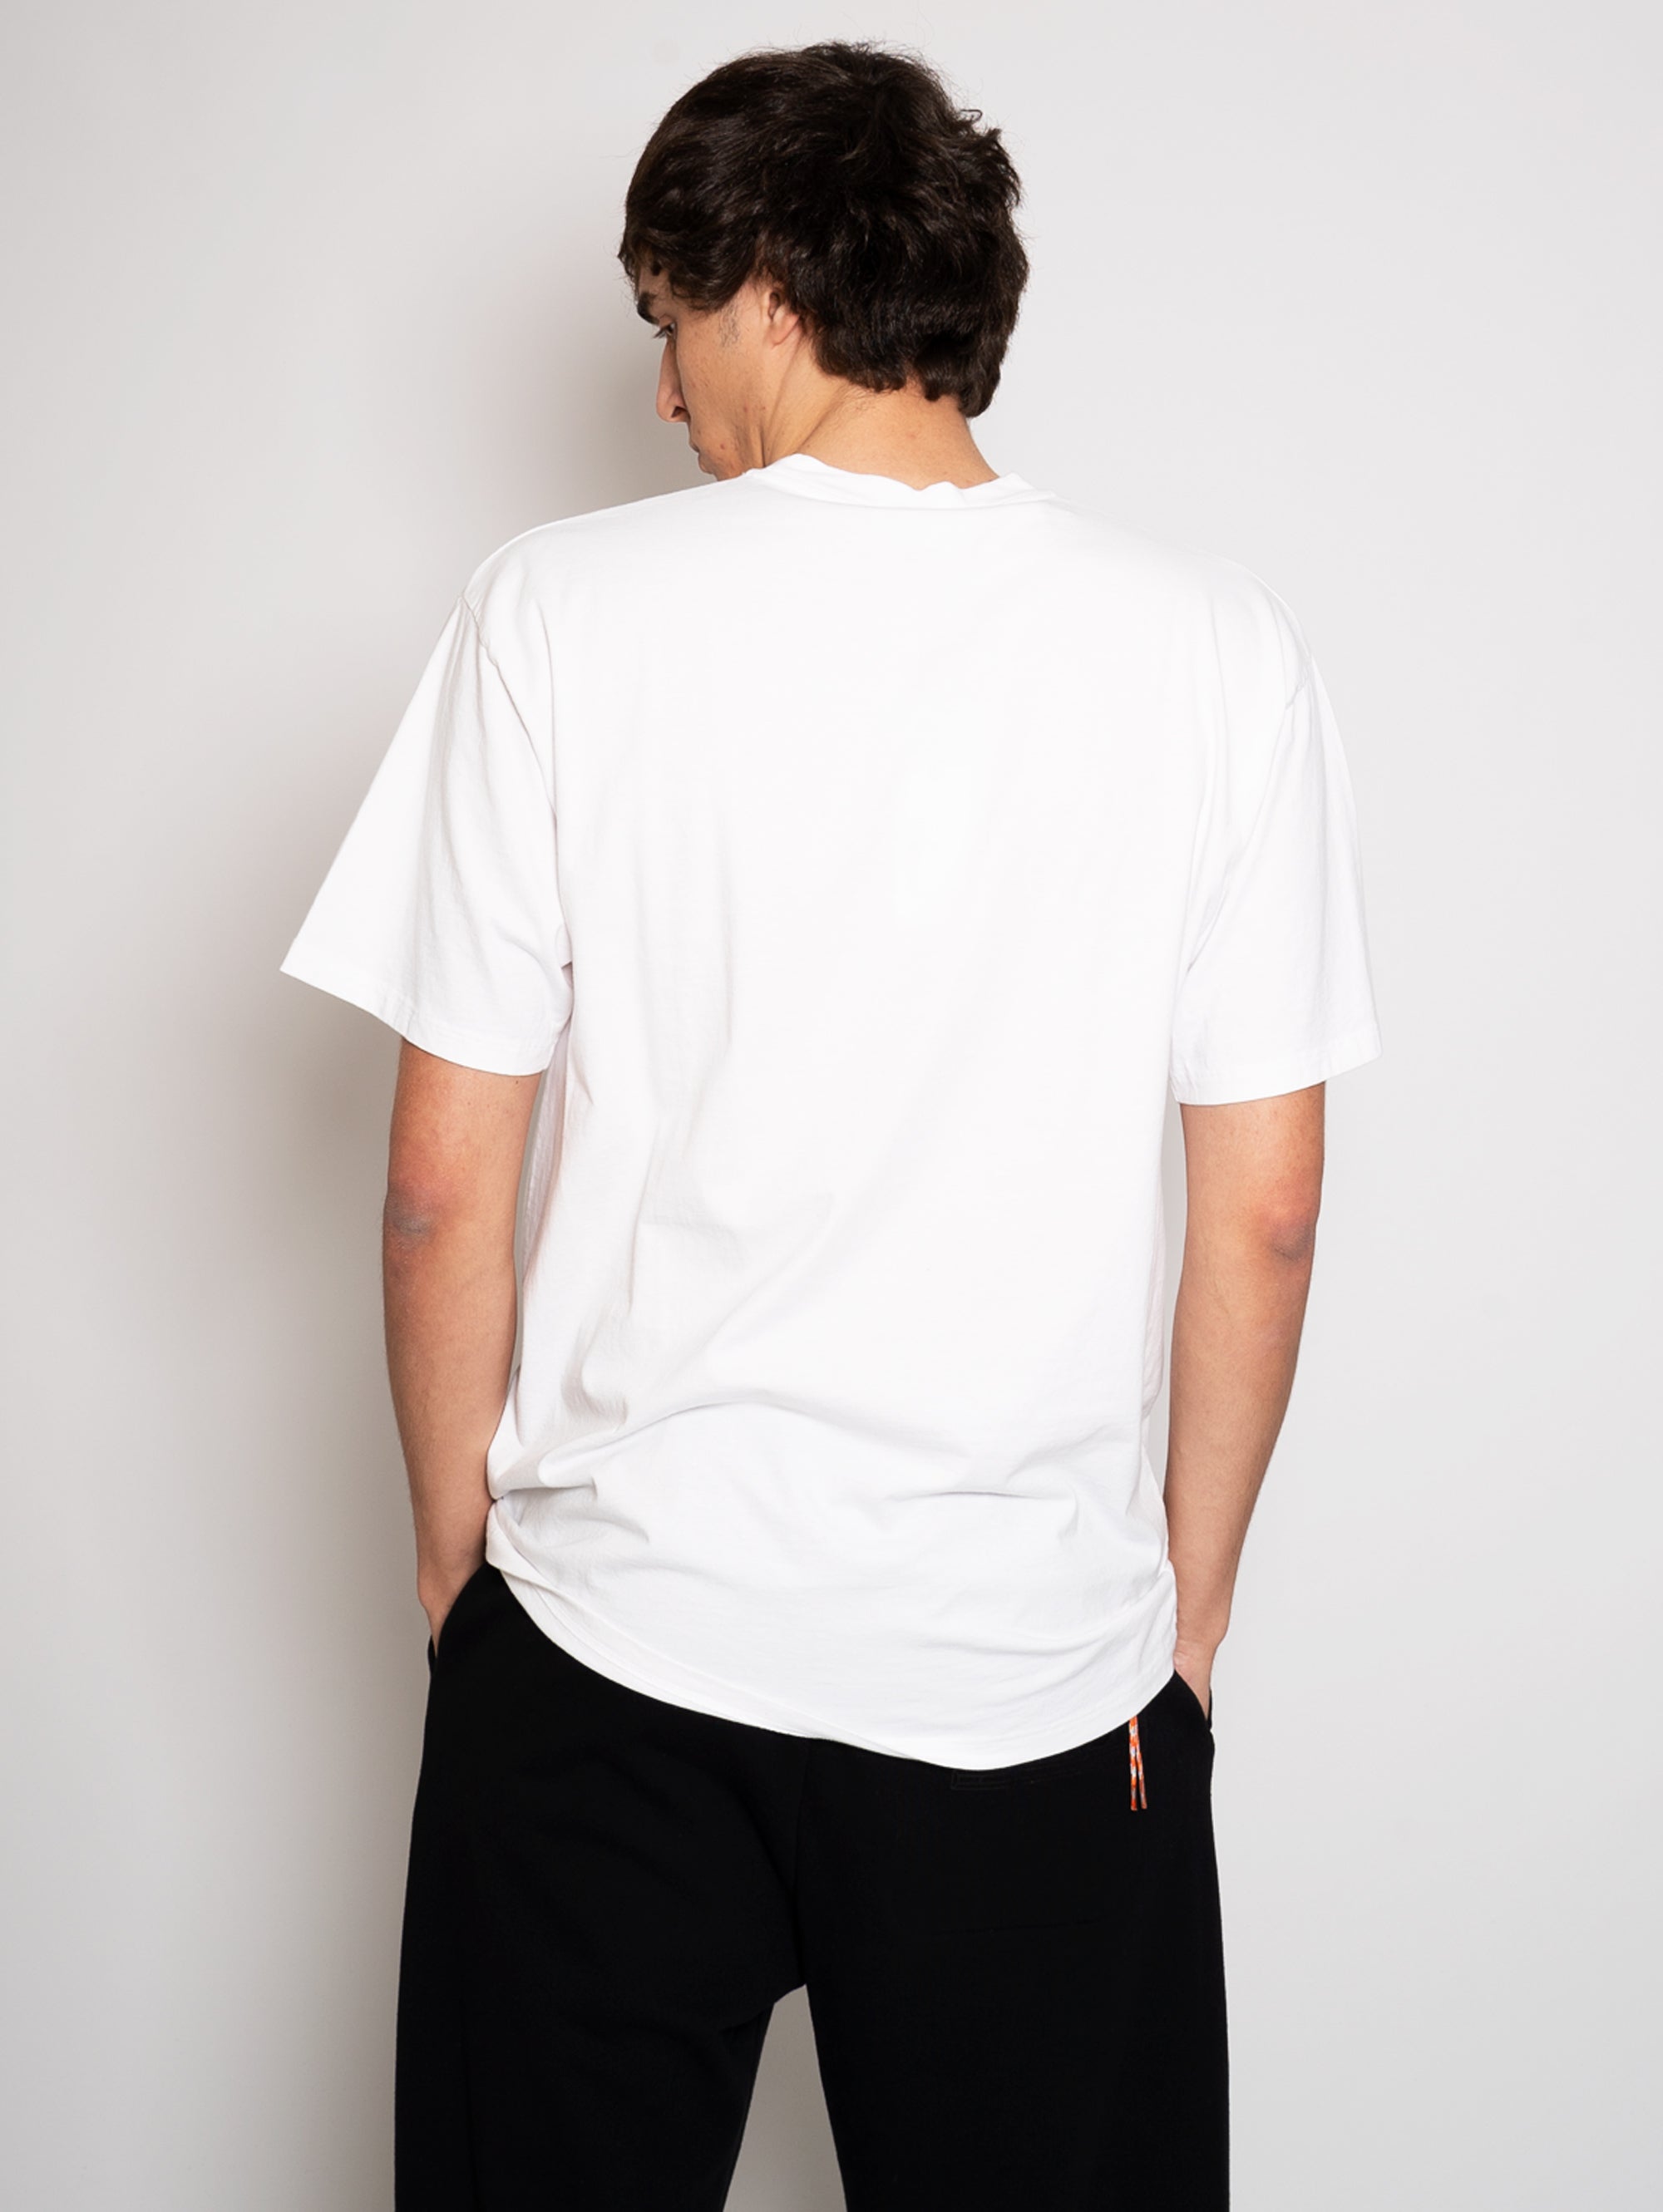 Reversible T-shirt with White Print